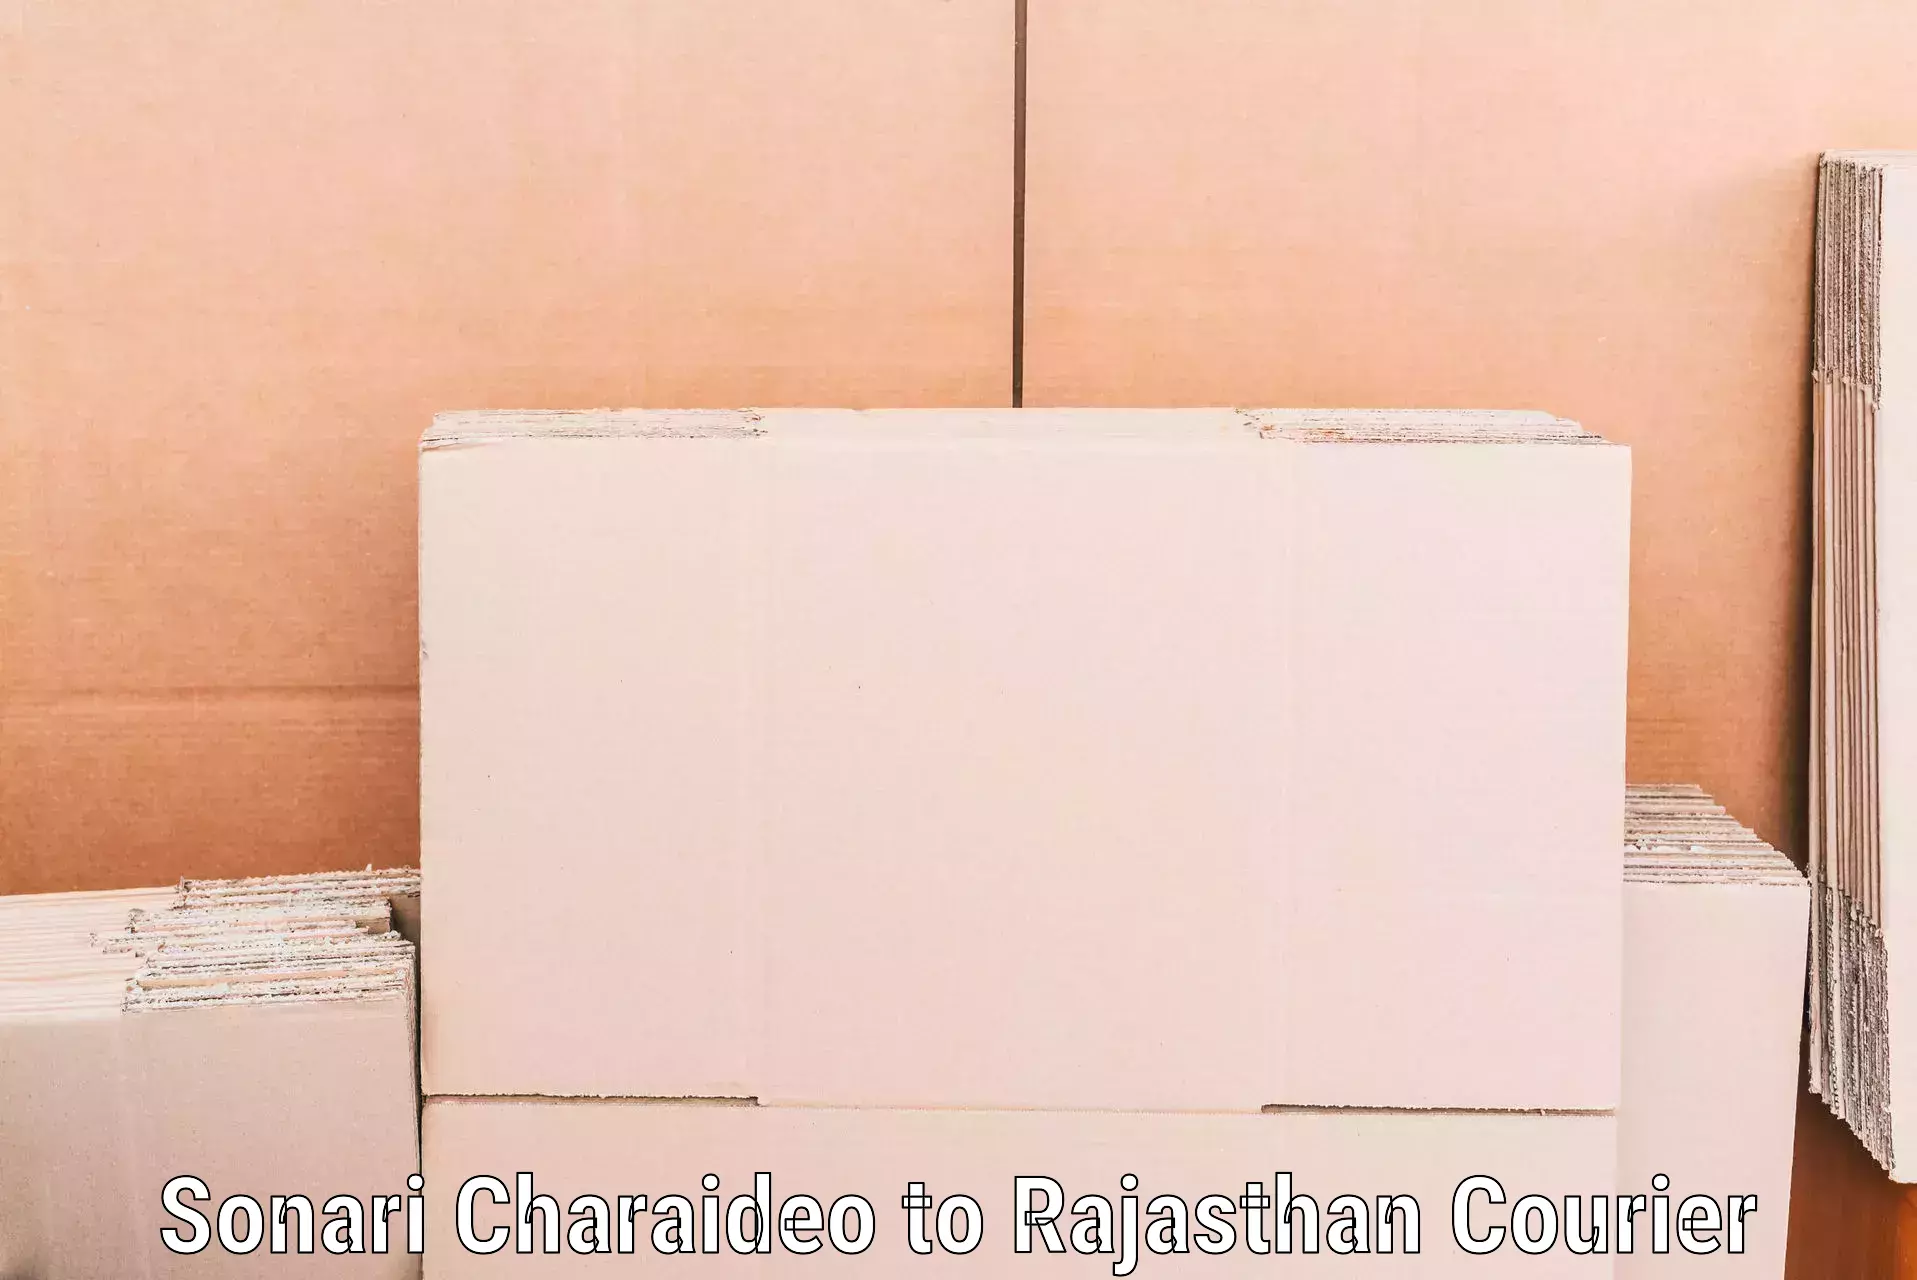 Efficient home movers in Sonari Charaideo to Laxmangarh